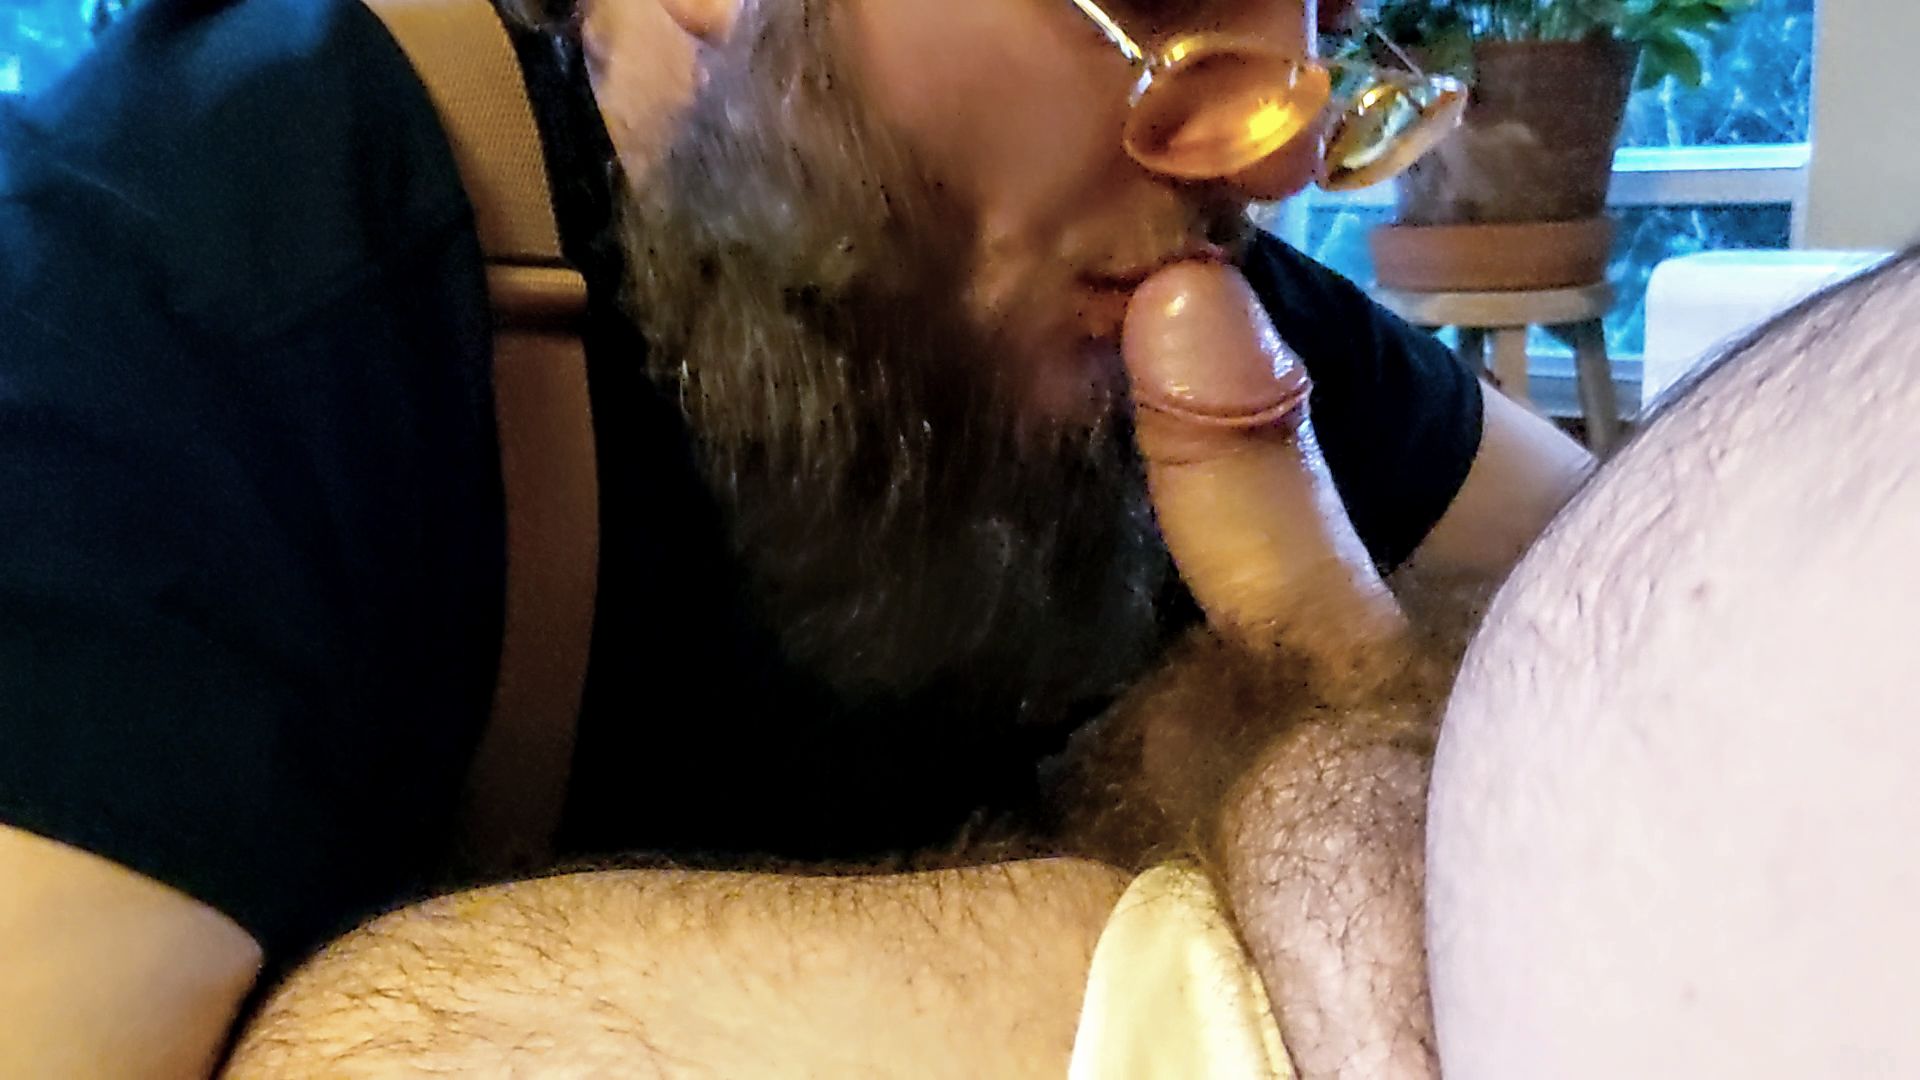 Bubbas doing gay stuff with cock and ass and butts and dick #10